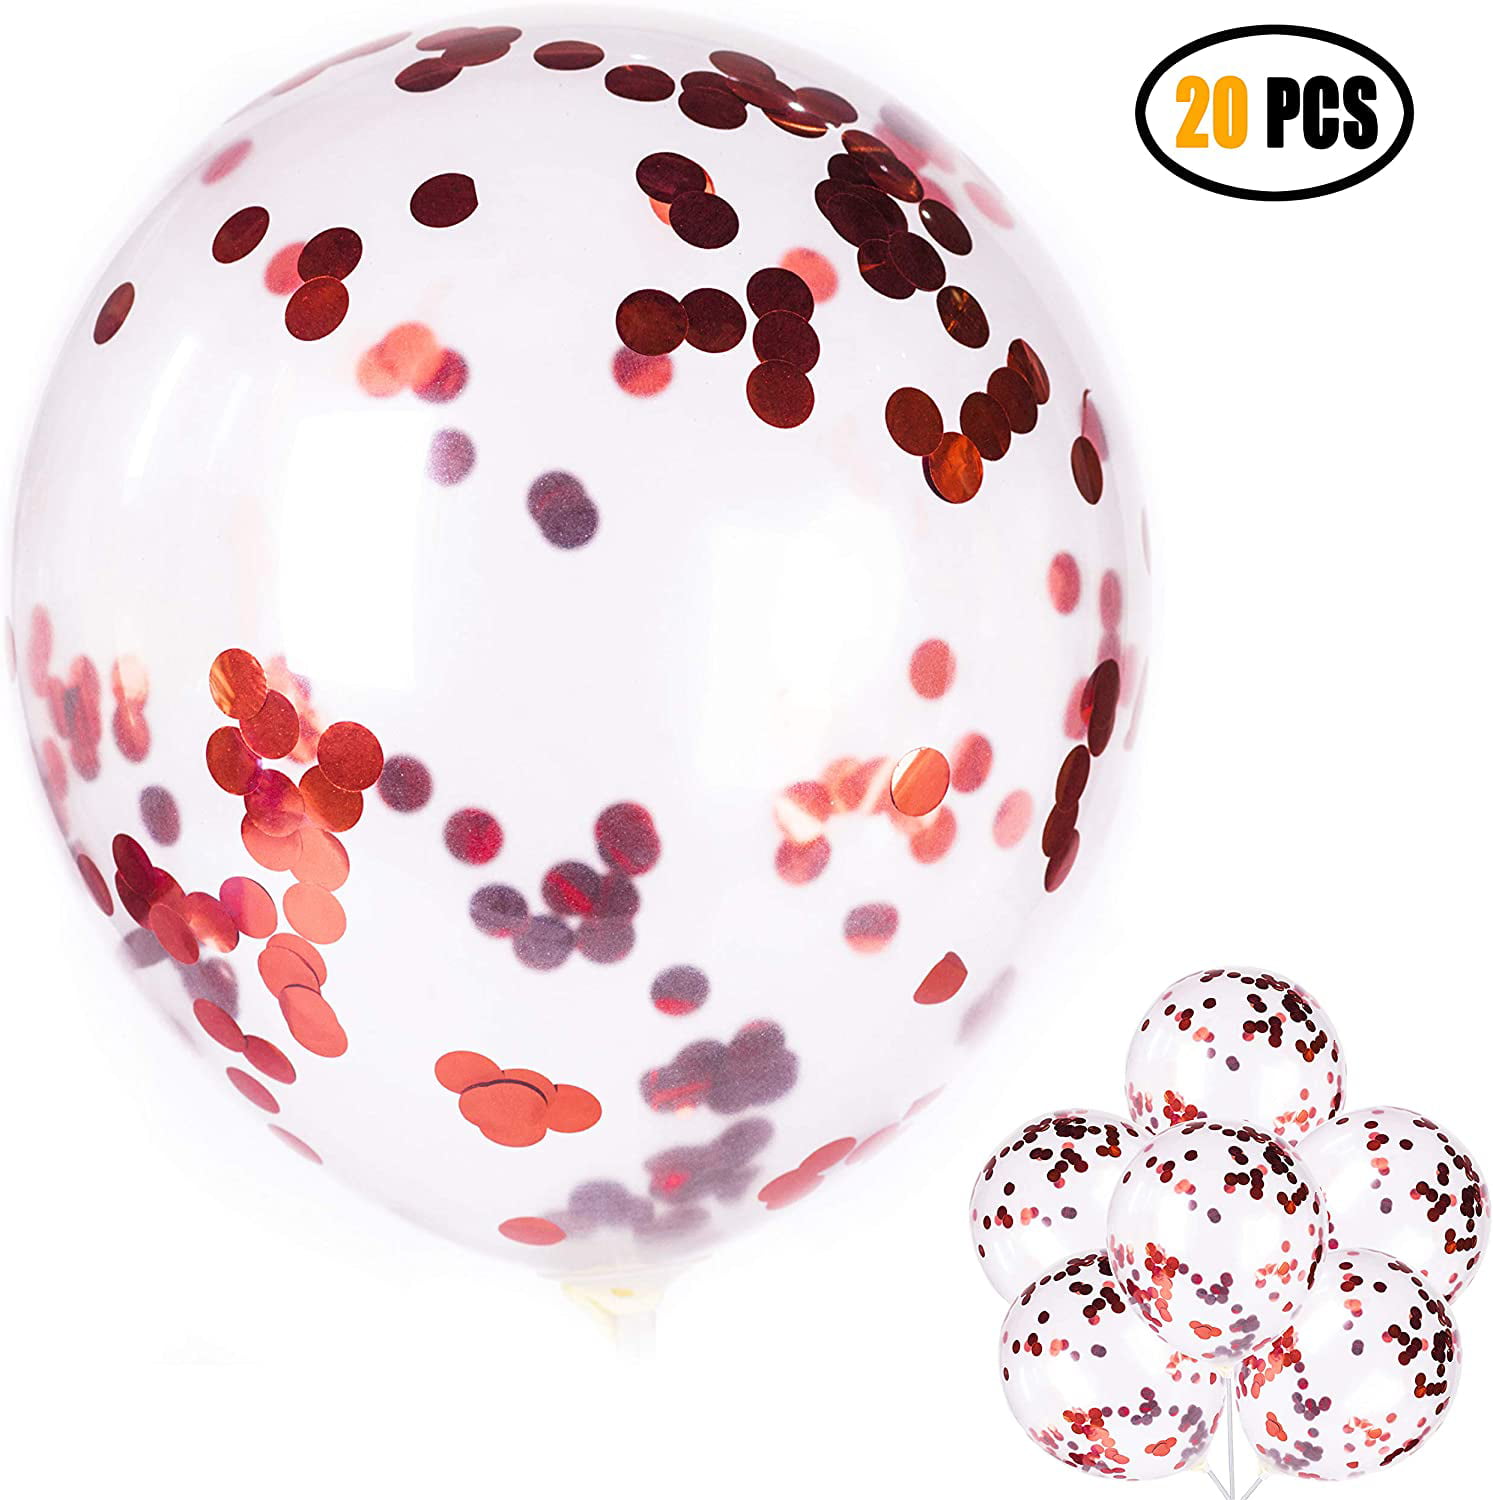 Details about   10 20 12" Confetti Latex Balloons Helium B-DAY Party Wedding Baby Shower Large 